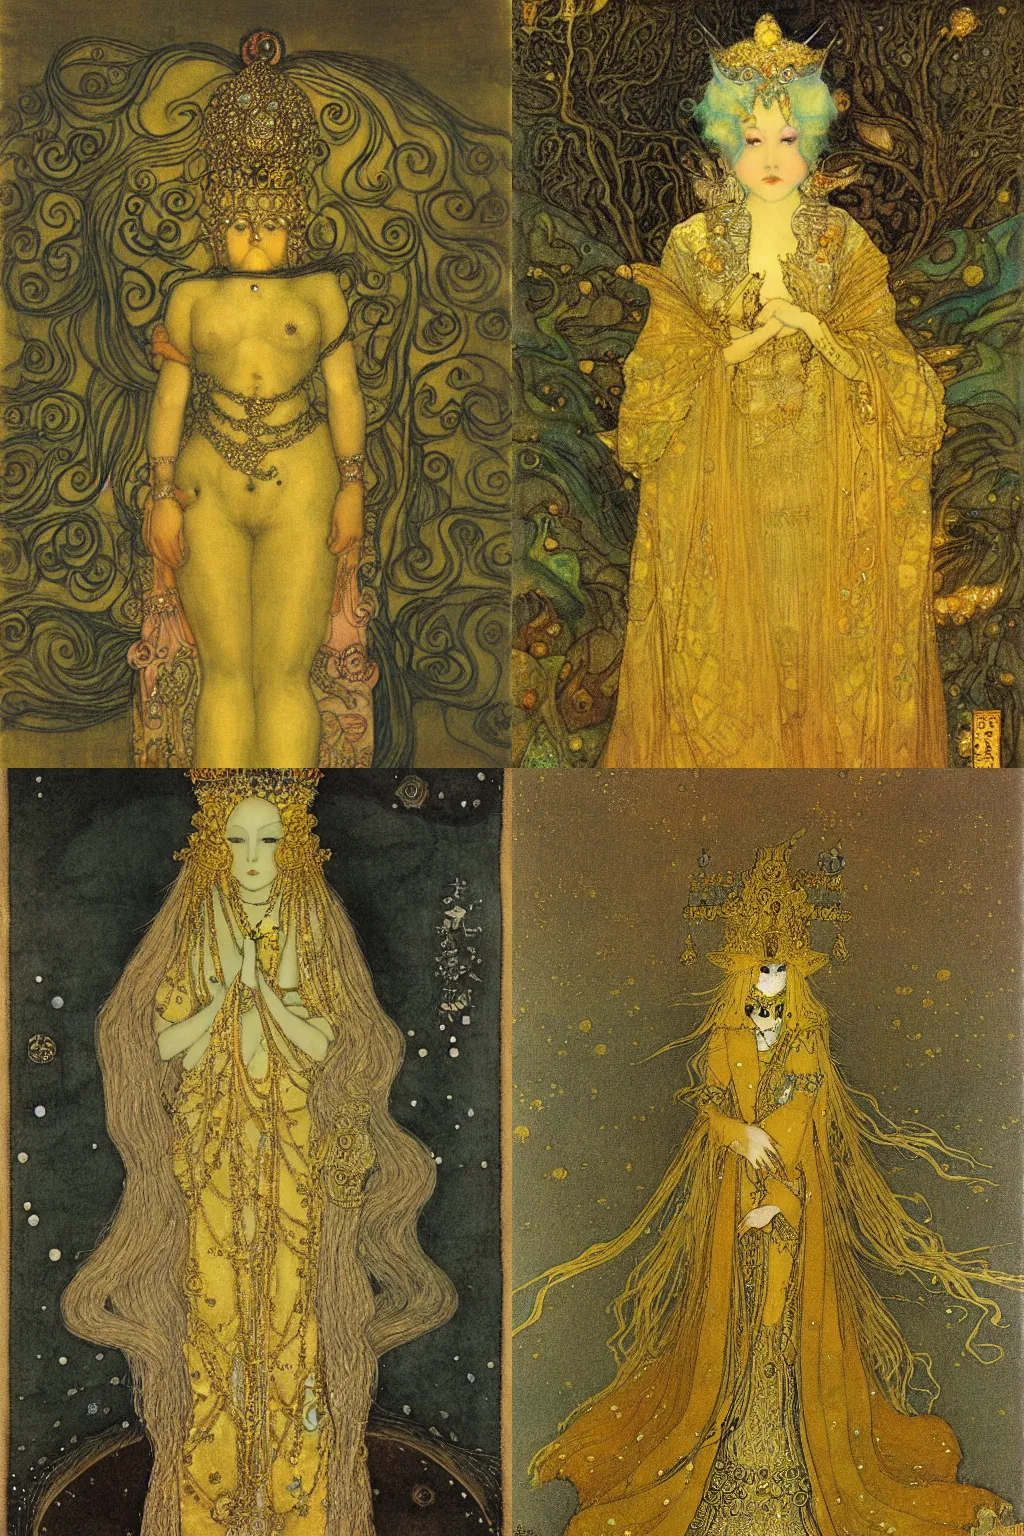 Prompt: Queen Midas by John Bauer, style of Yoshitaka Amano, oil painting on canvas